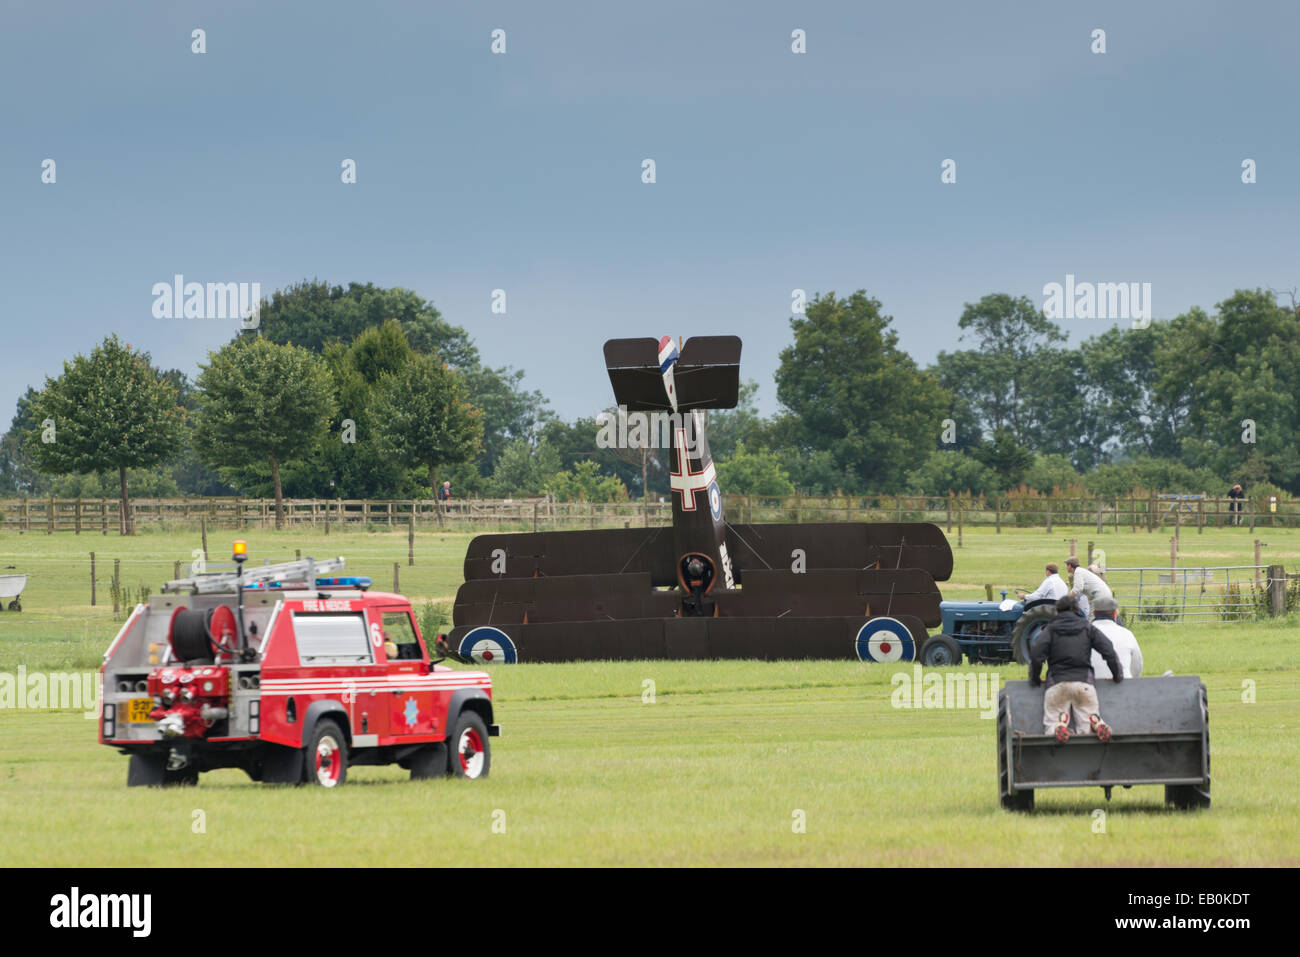 Biggleswade, UK - 29 June 2014: A vintage 1916 British Sopwith Triplane crash landed at the Shuttleworth Collection air show. Stock Photo